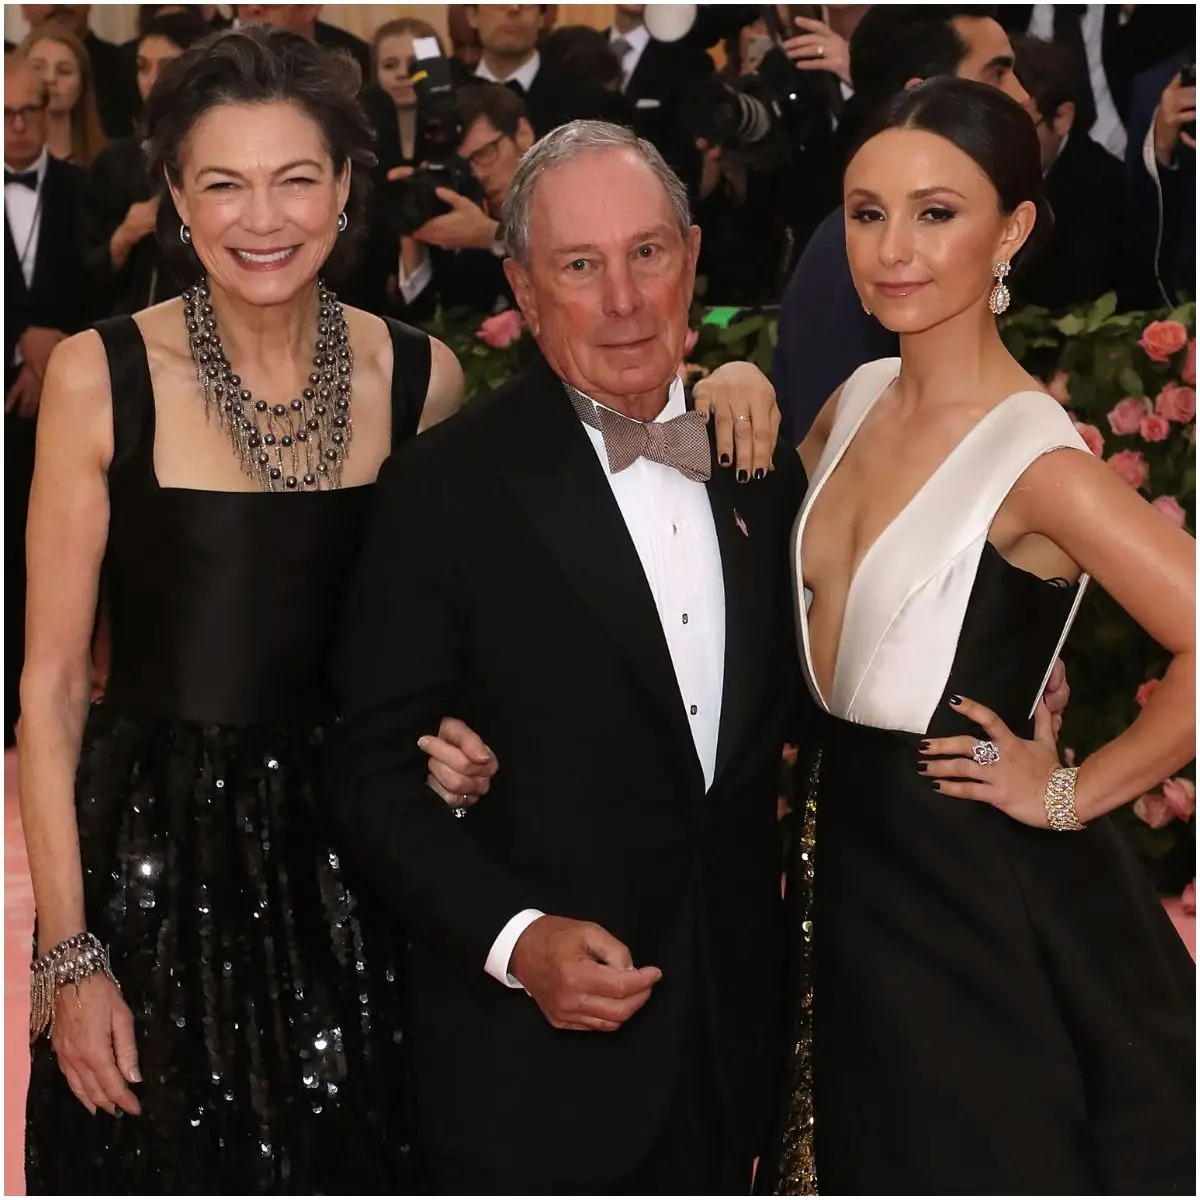 Diana Taylor with Mike Bloomberg and his daughter Georgina Bloomberg